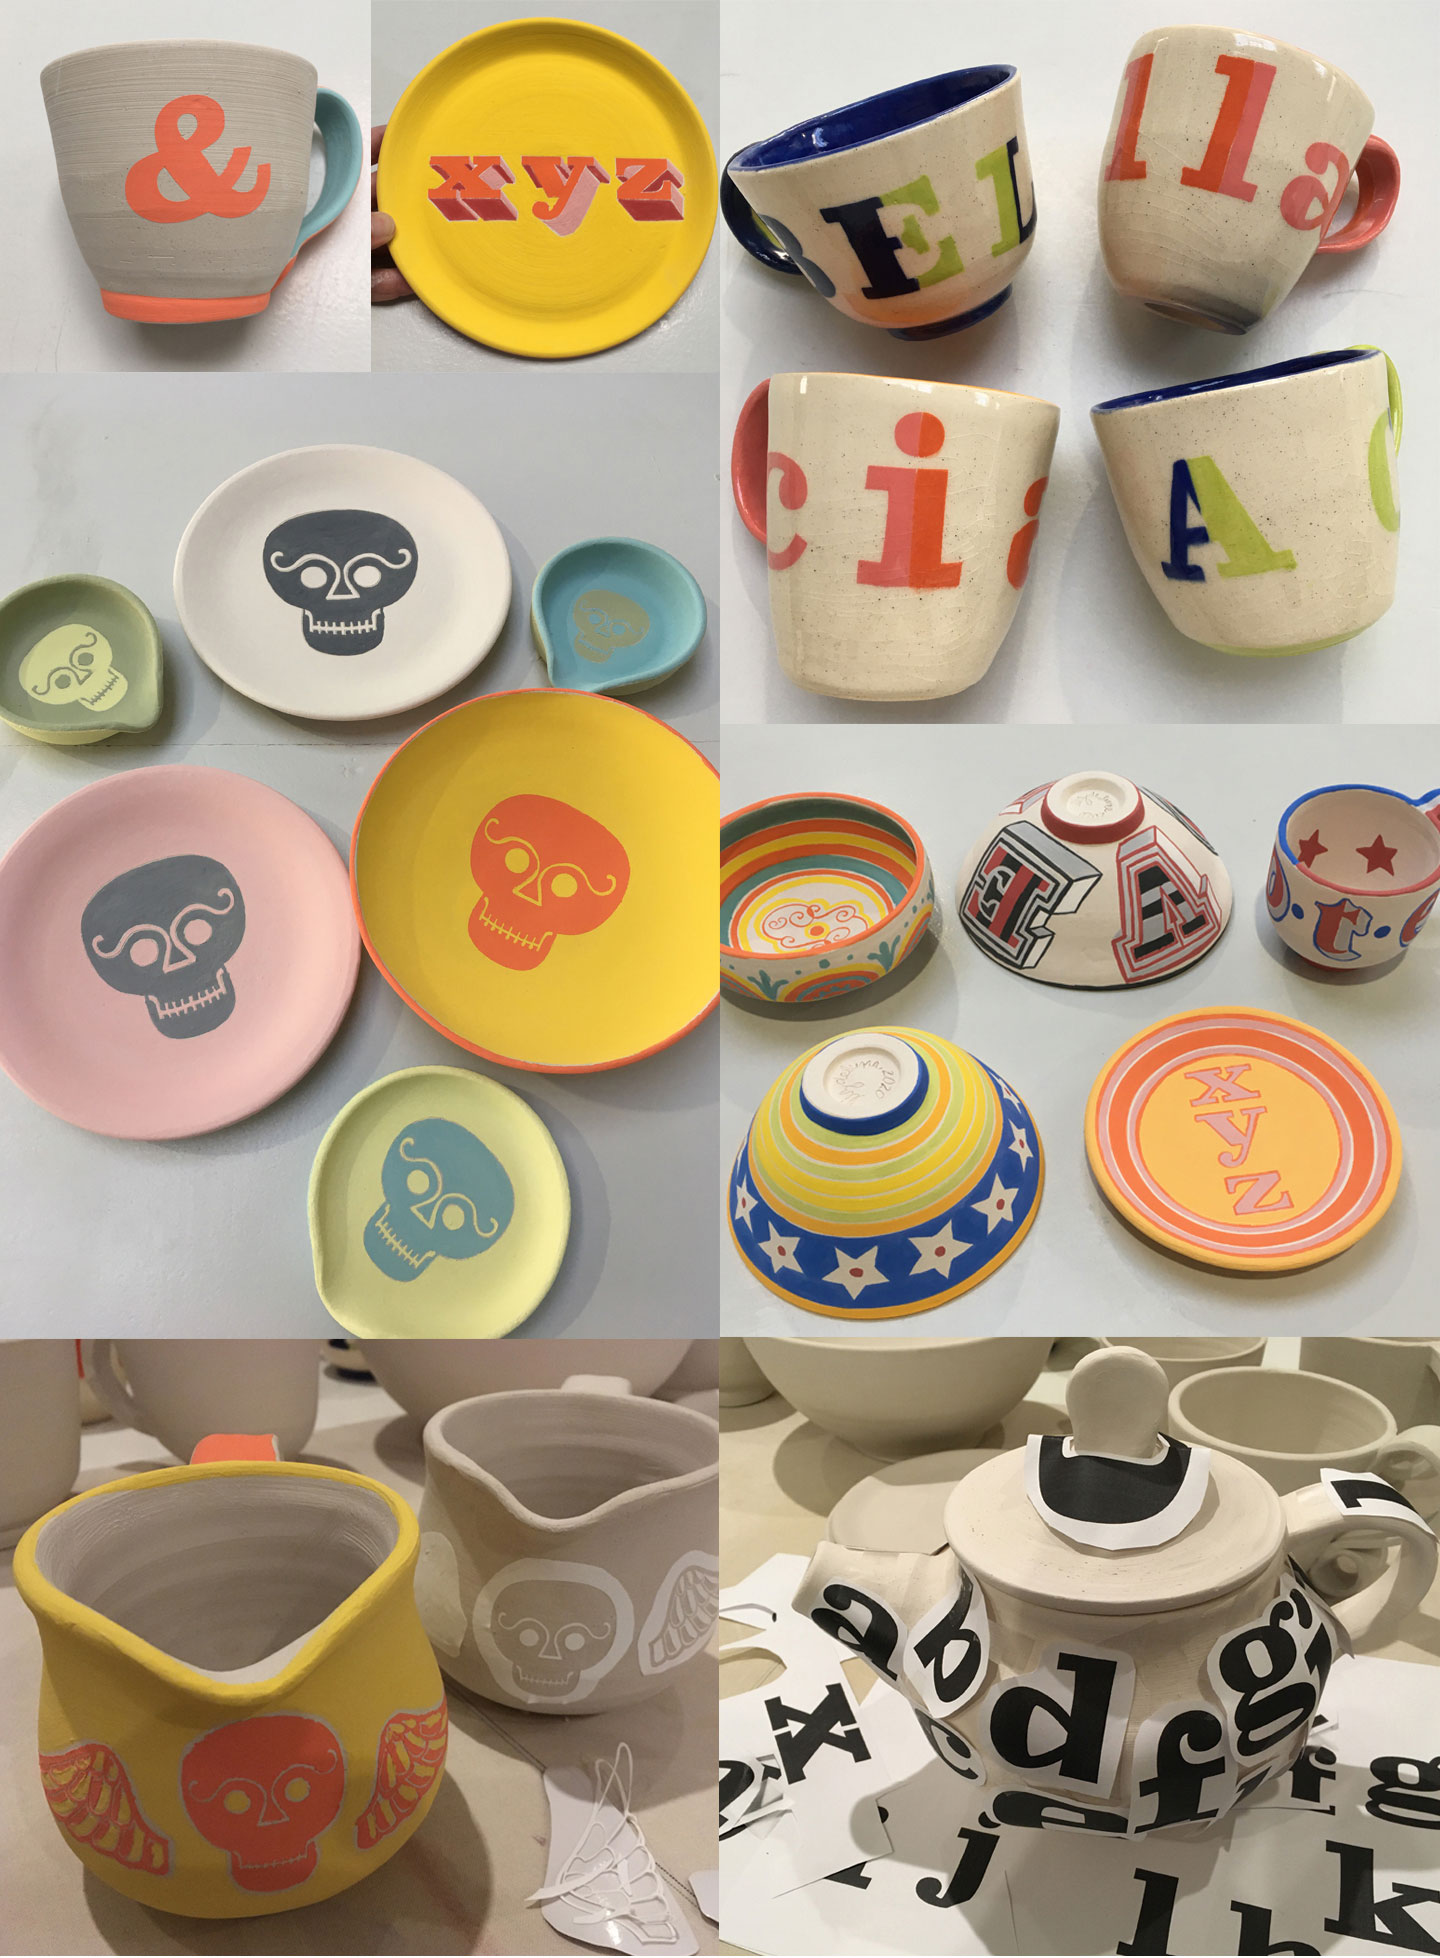 More mugs, bowls, plates, pitchers and a teapot: In process and after final glazing